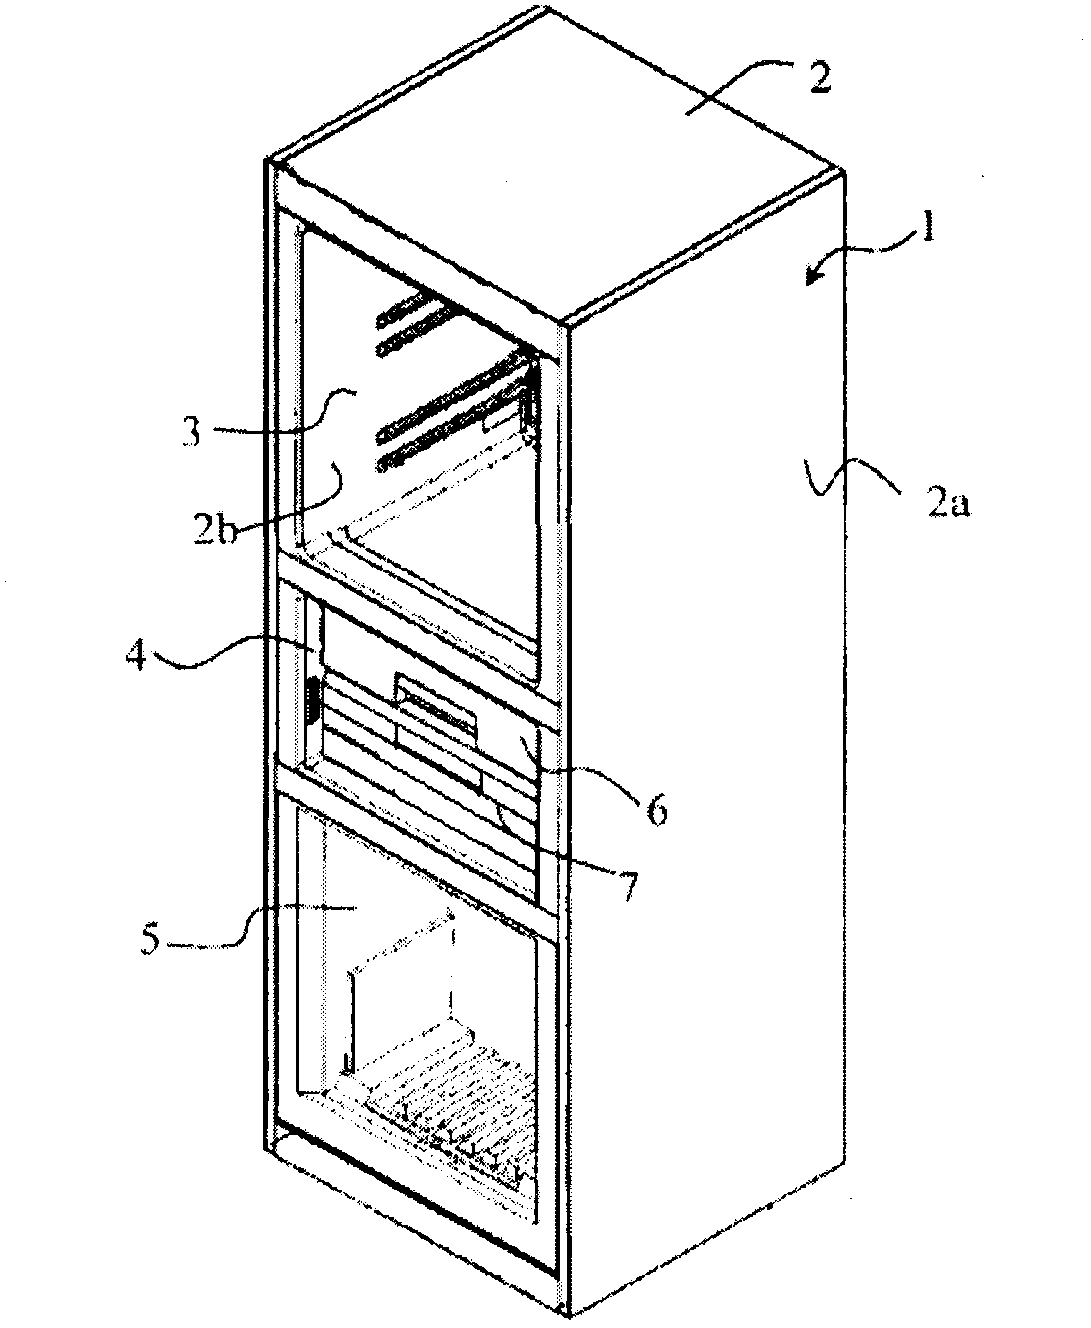 Low-pressure container and refrigerator with same